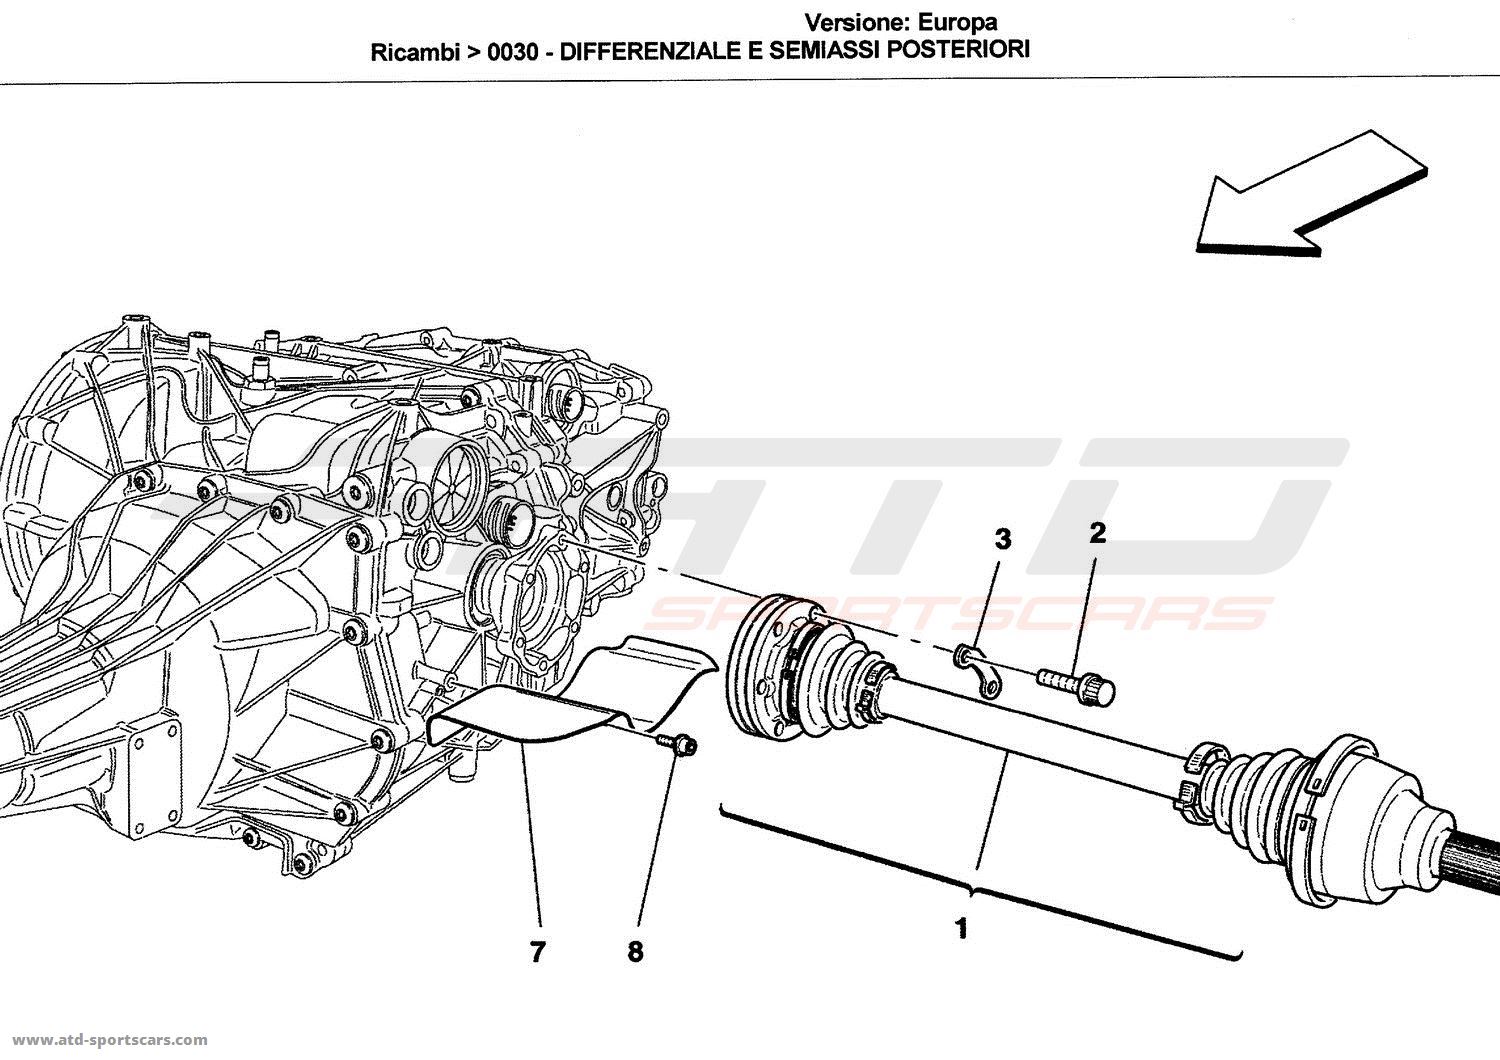 DIFFERENTIAL AND REAR AXLE SHAFTS